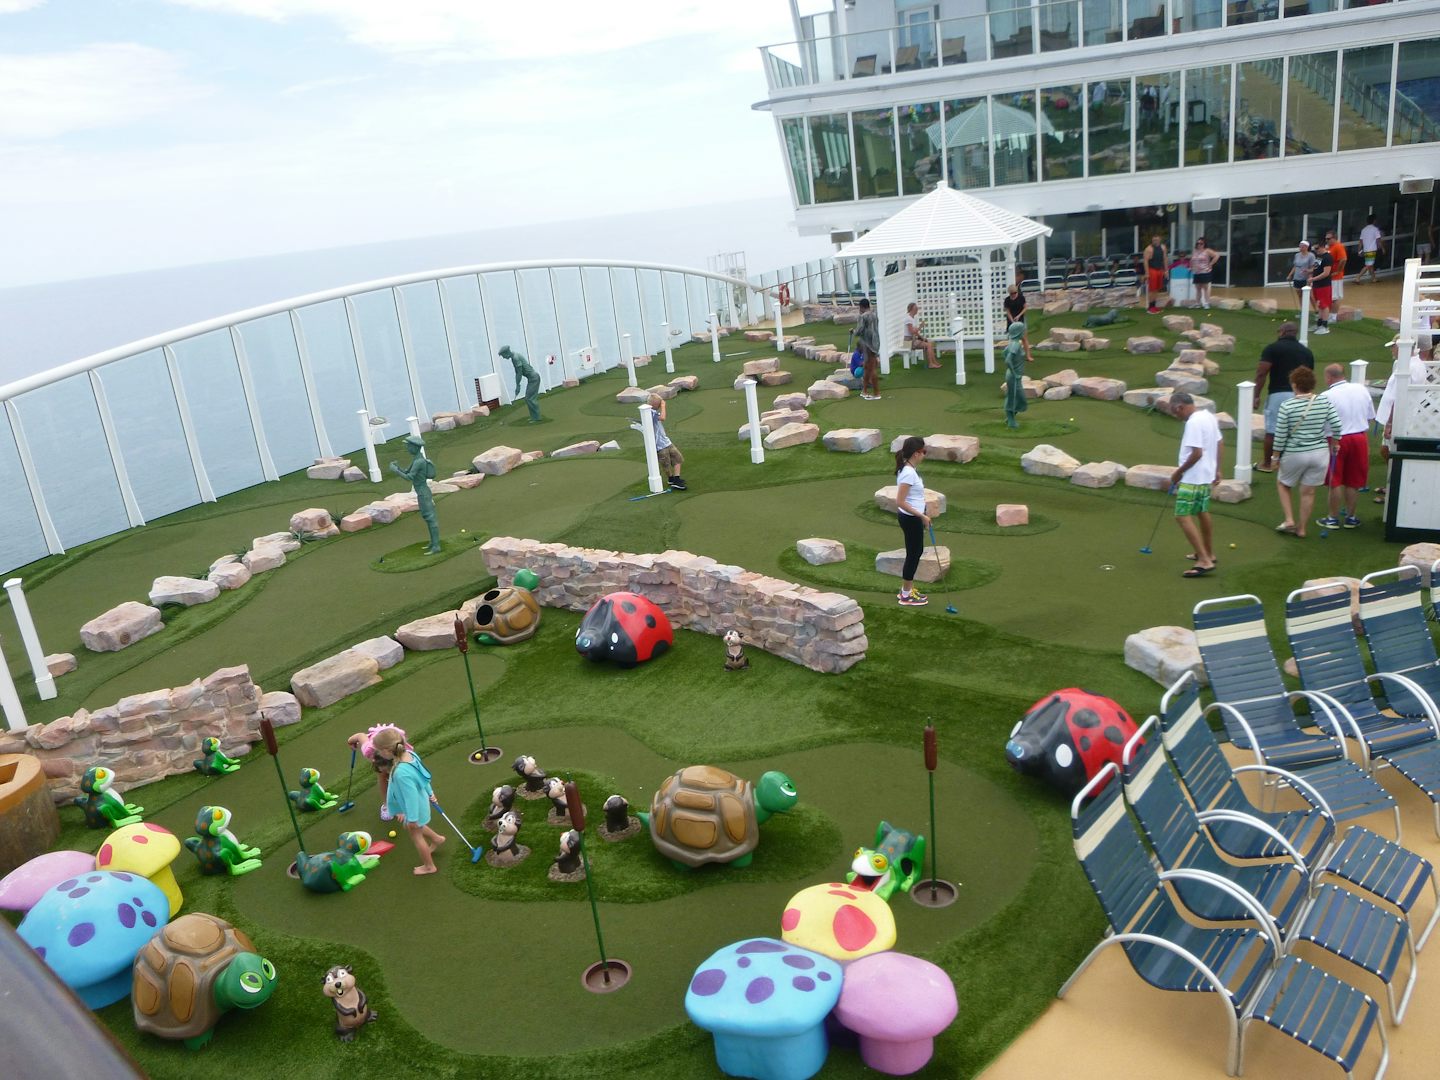 The miniature golf course had family times, adult times and children's times for play